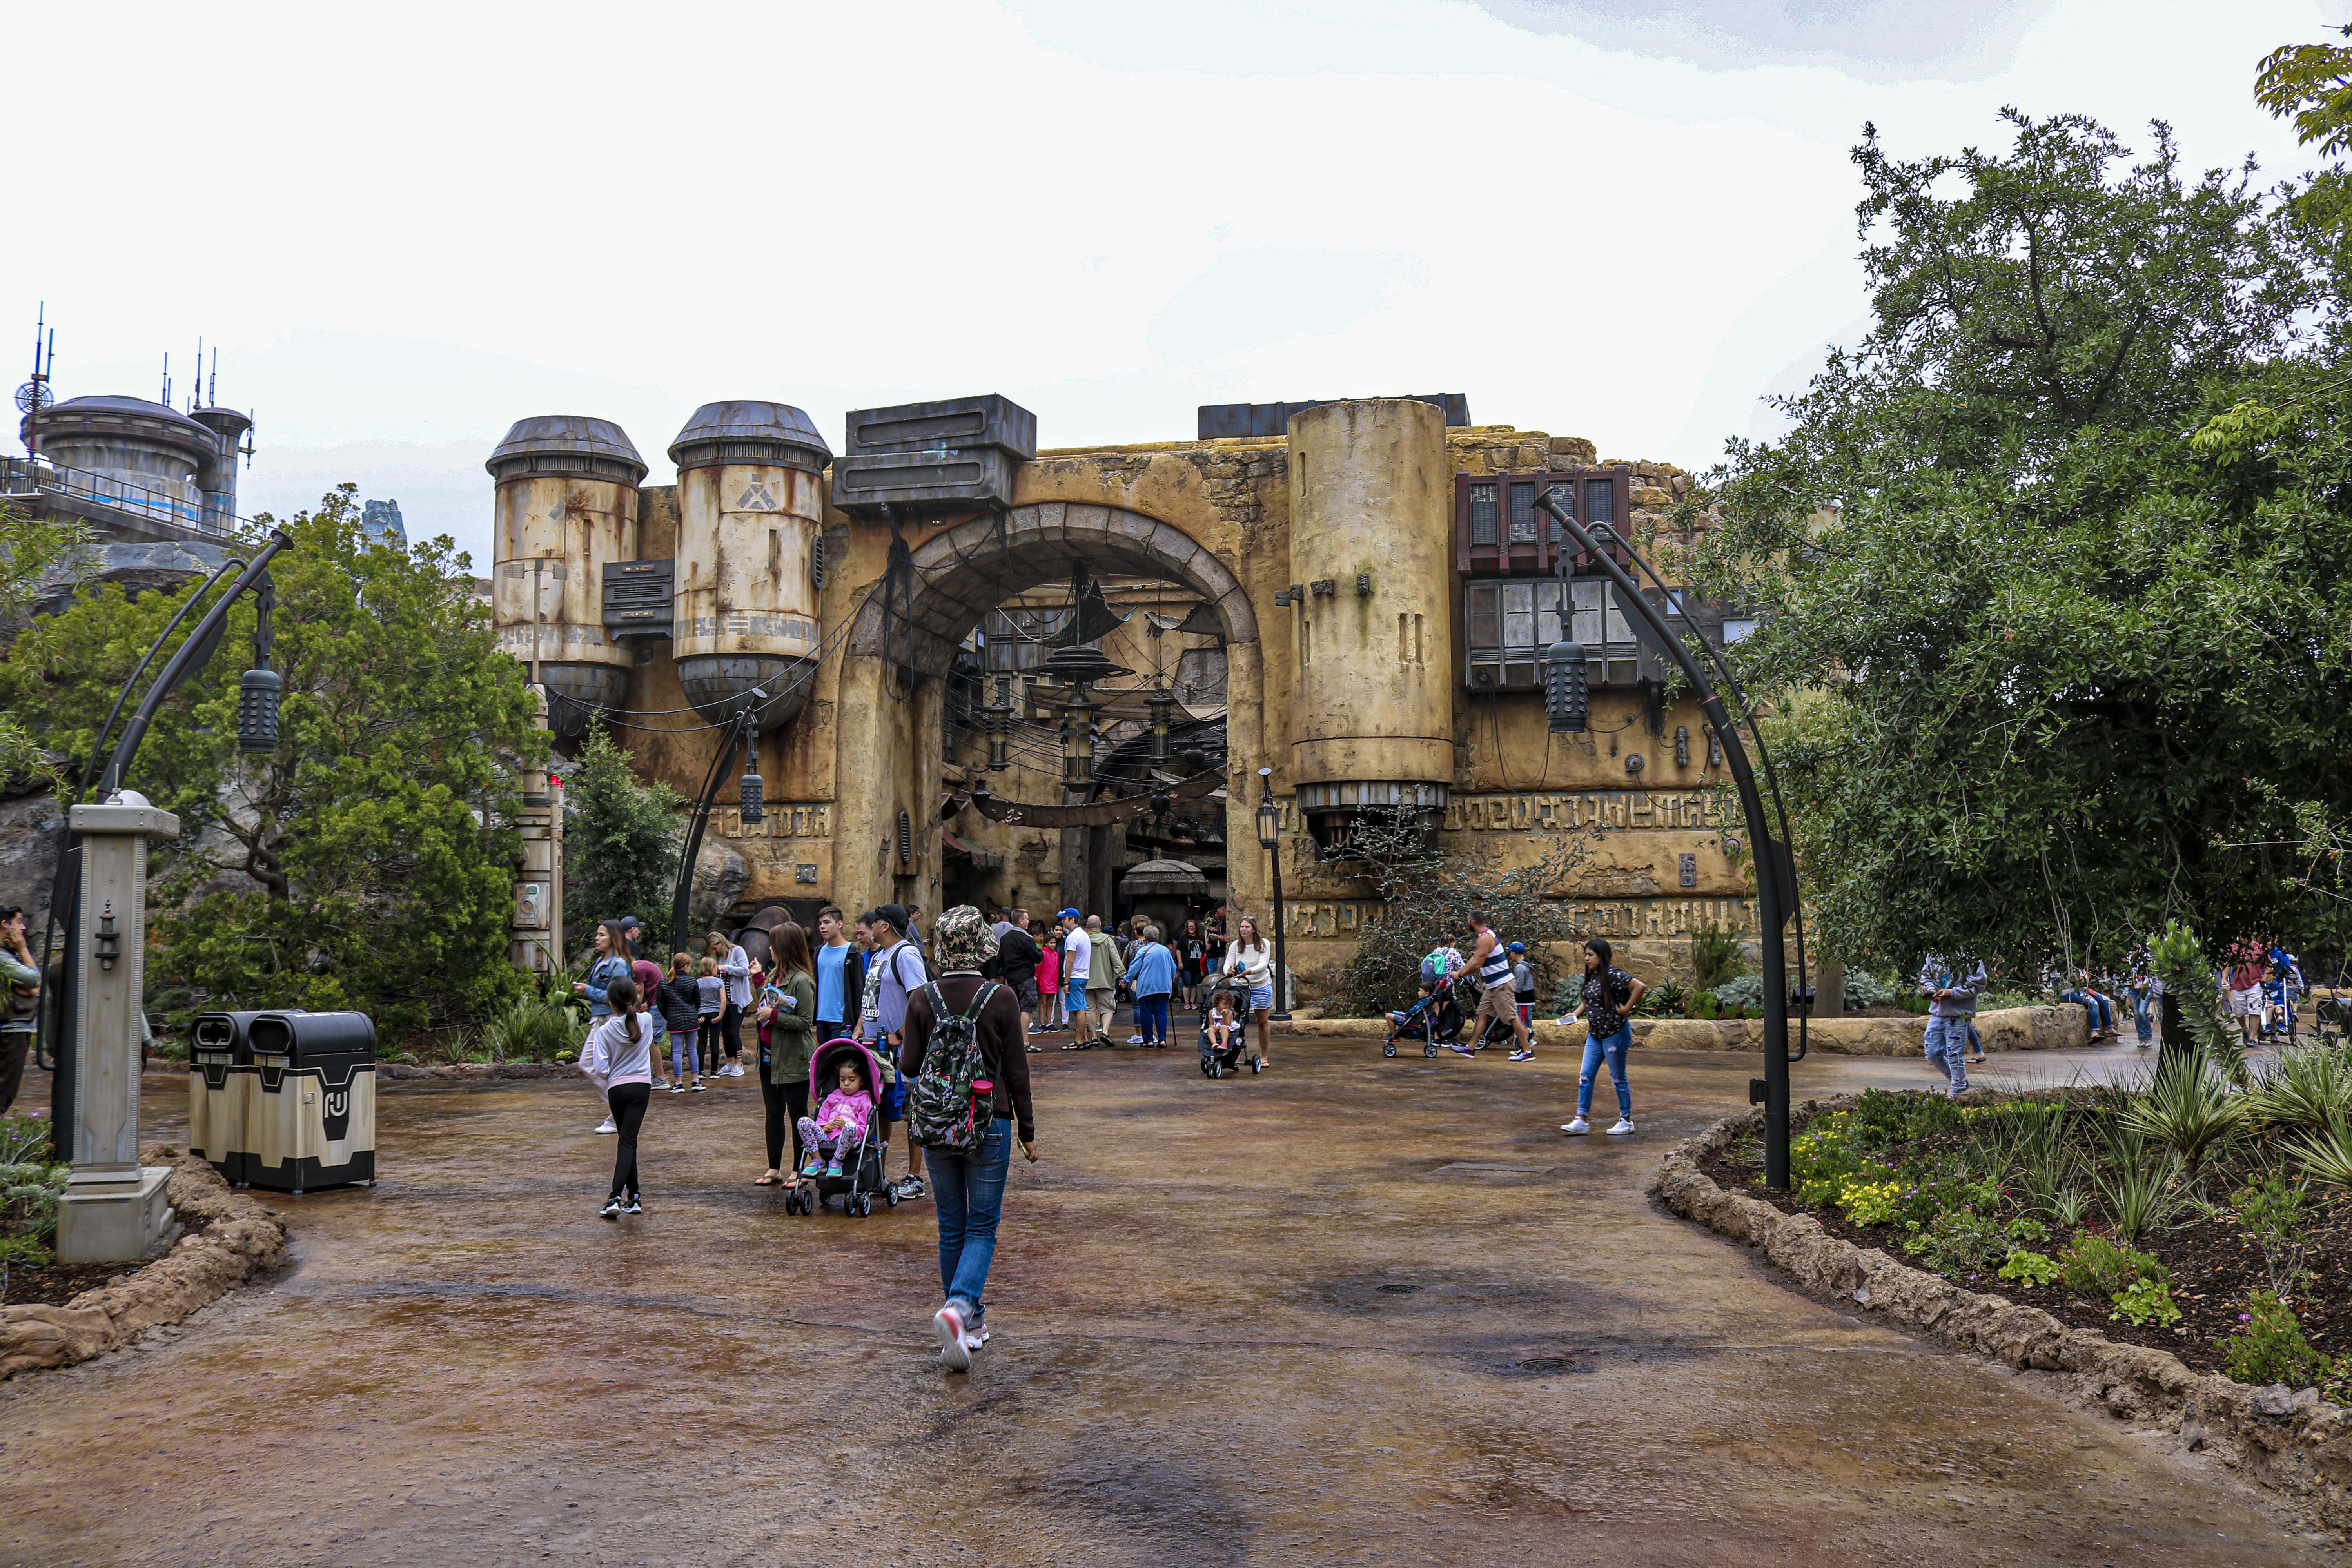 Travelers venture into the stormy day ahead at Star Wars: Galaxy's Edge.